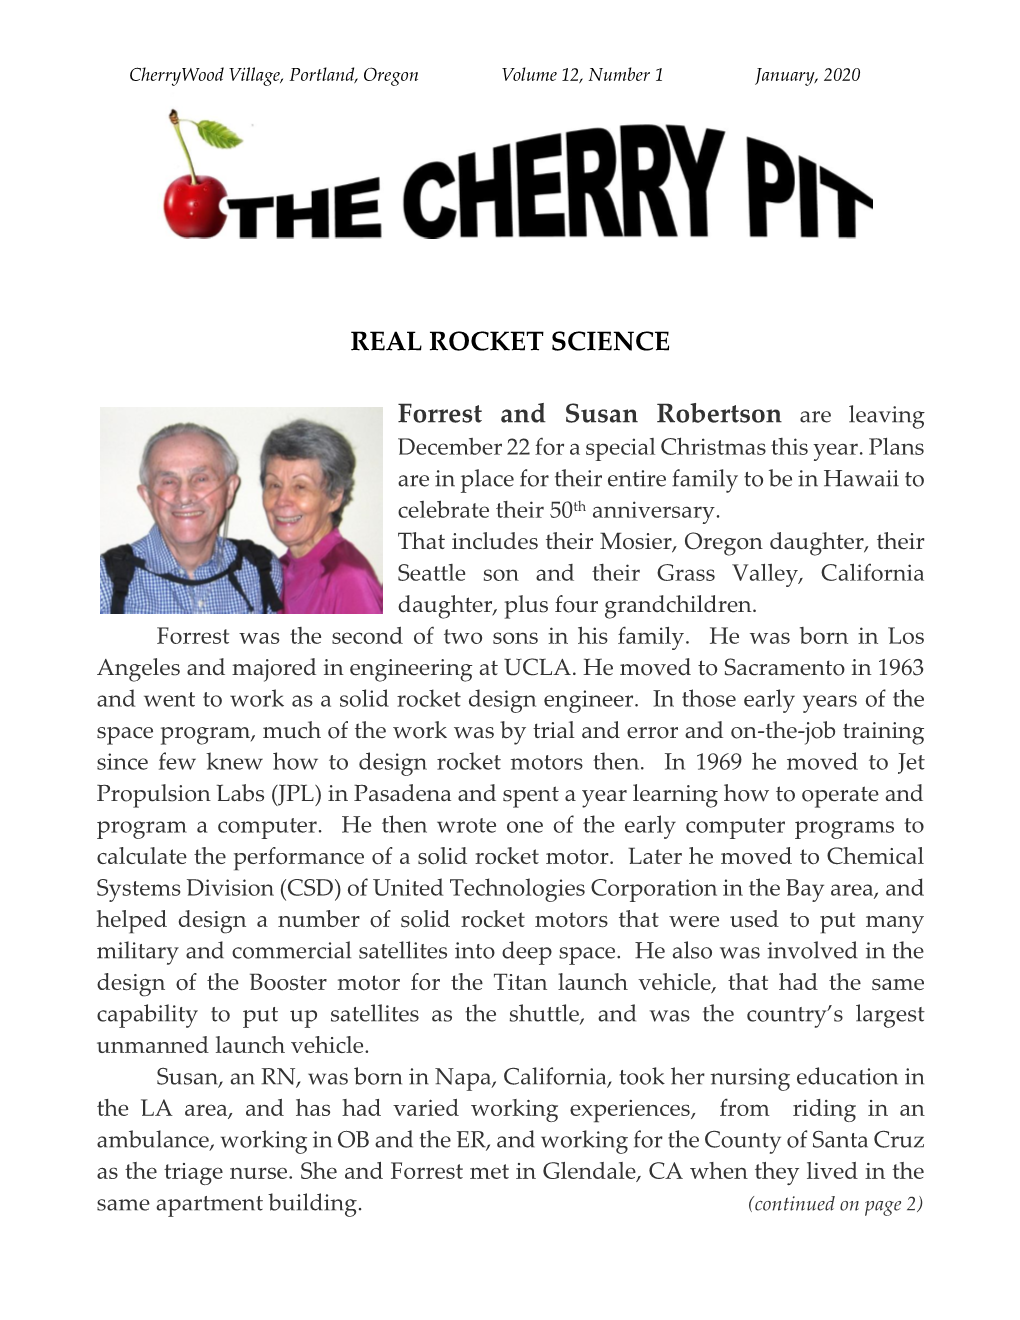 REAL ROCKET SCIENCE Forrest and Susan Robertson Are Leaving